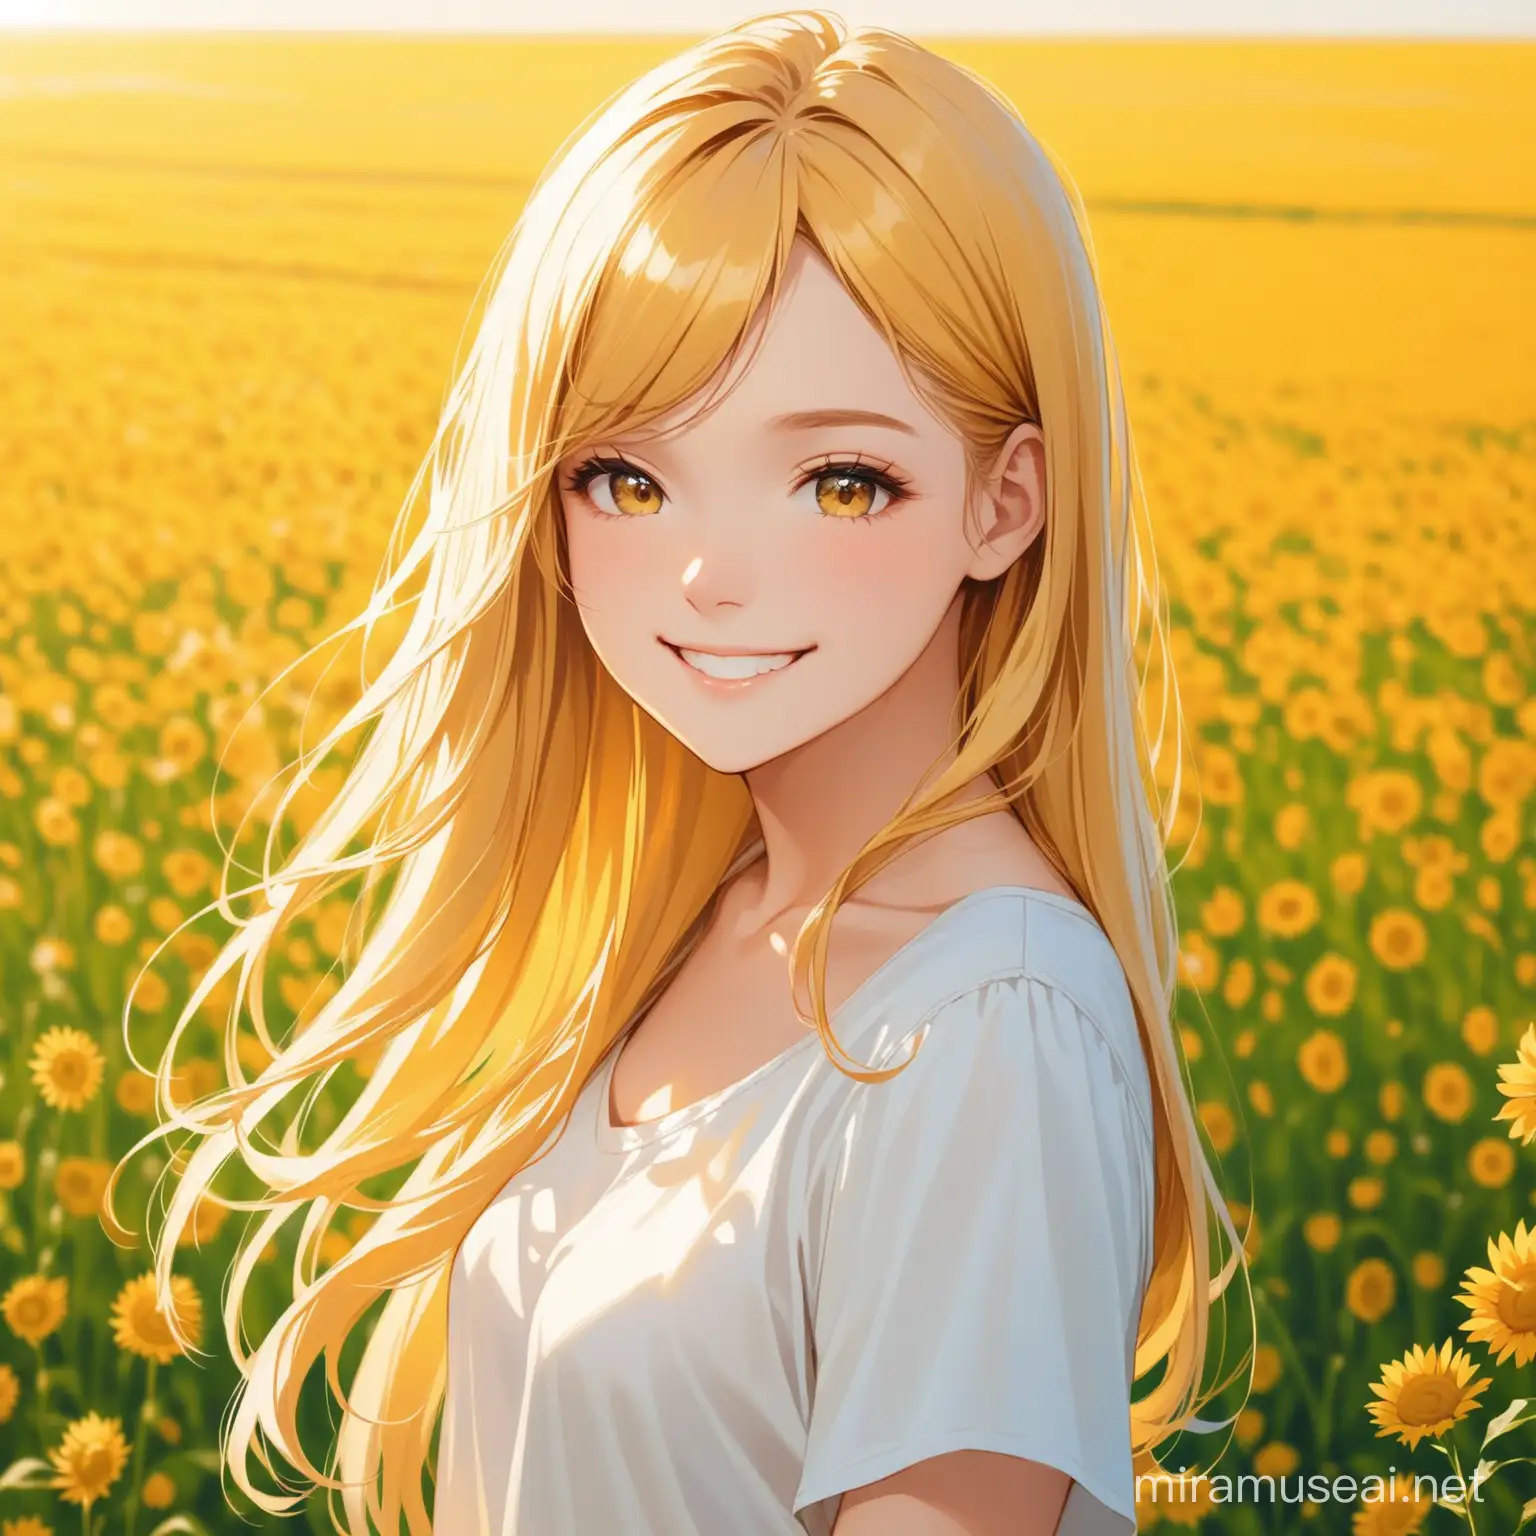 A girl with beautiful golden hair in fiels smiling